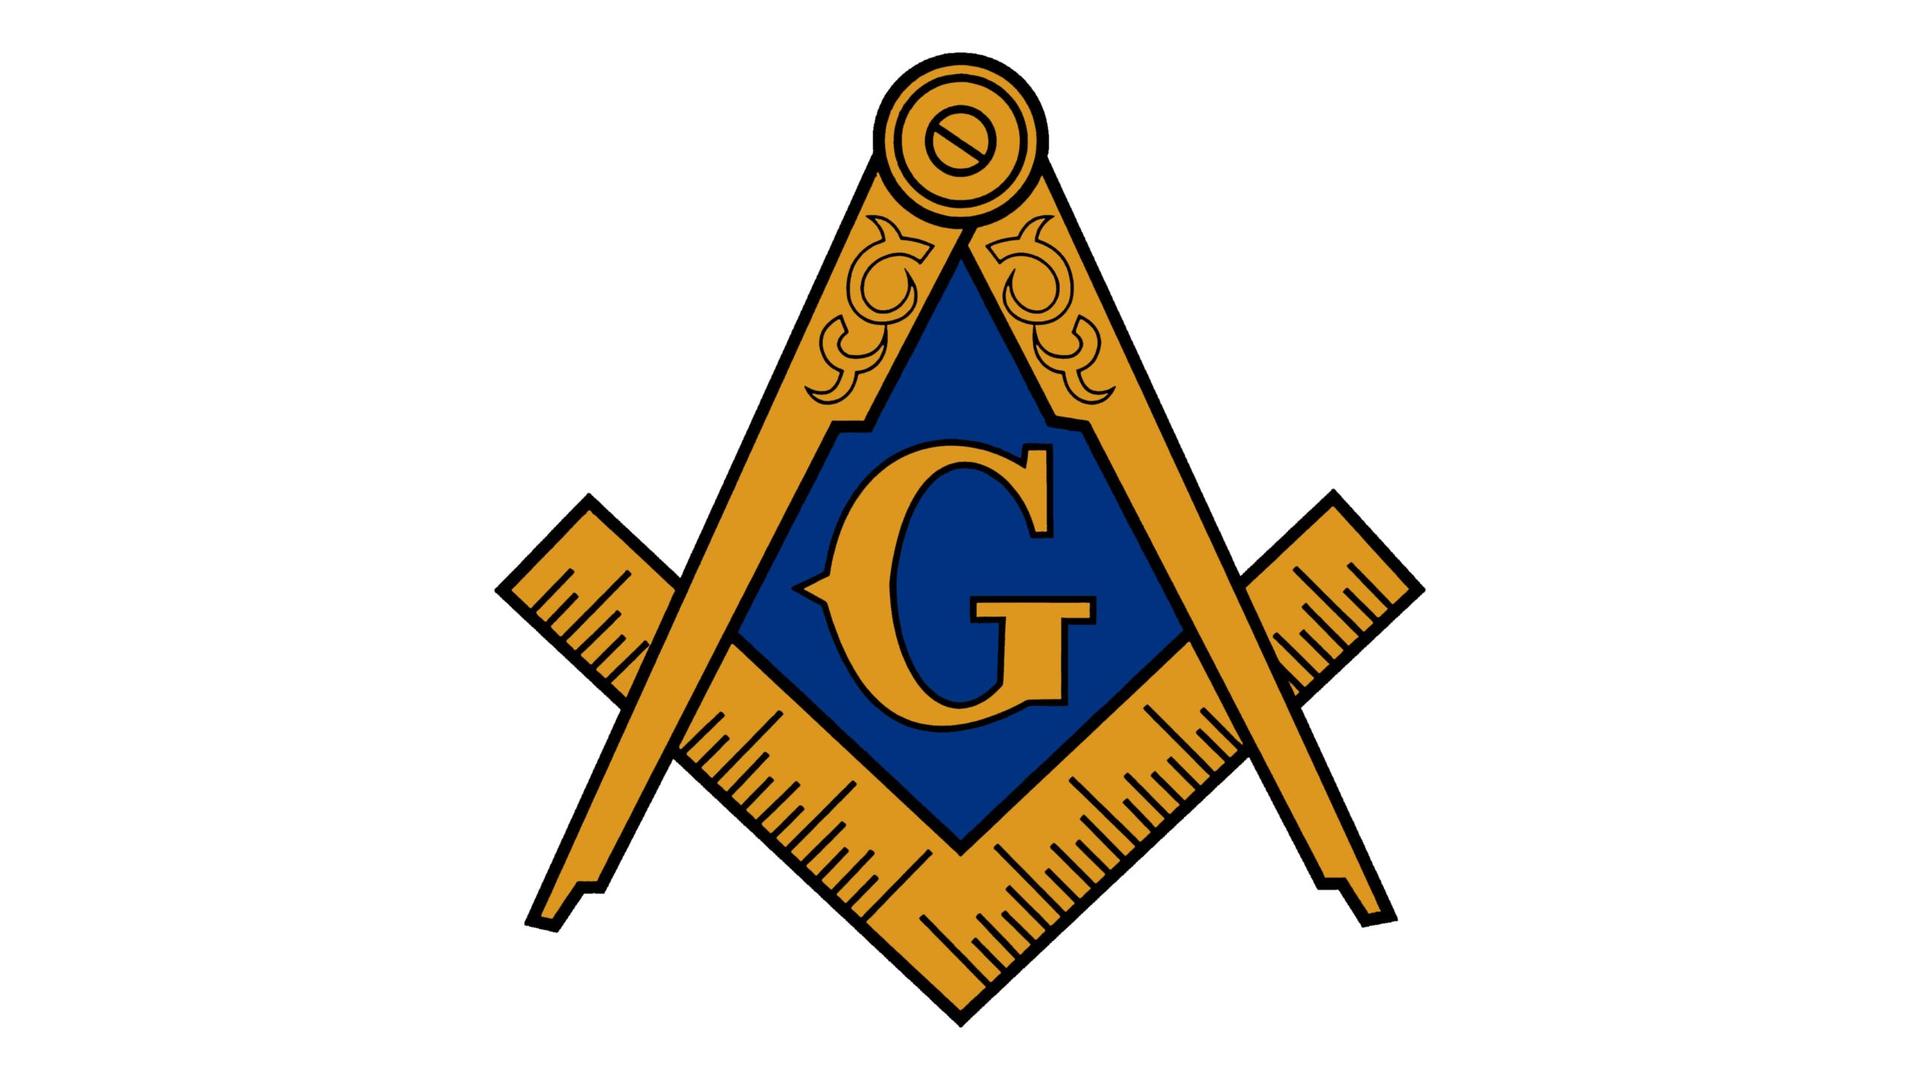 How the Vatican’s ‘no’ to Freemasonry is also about the enemy within